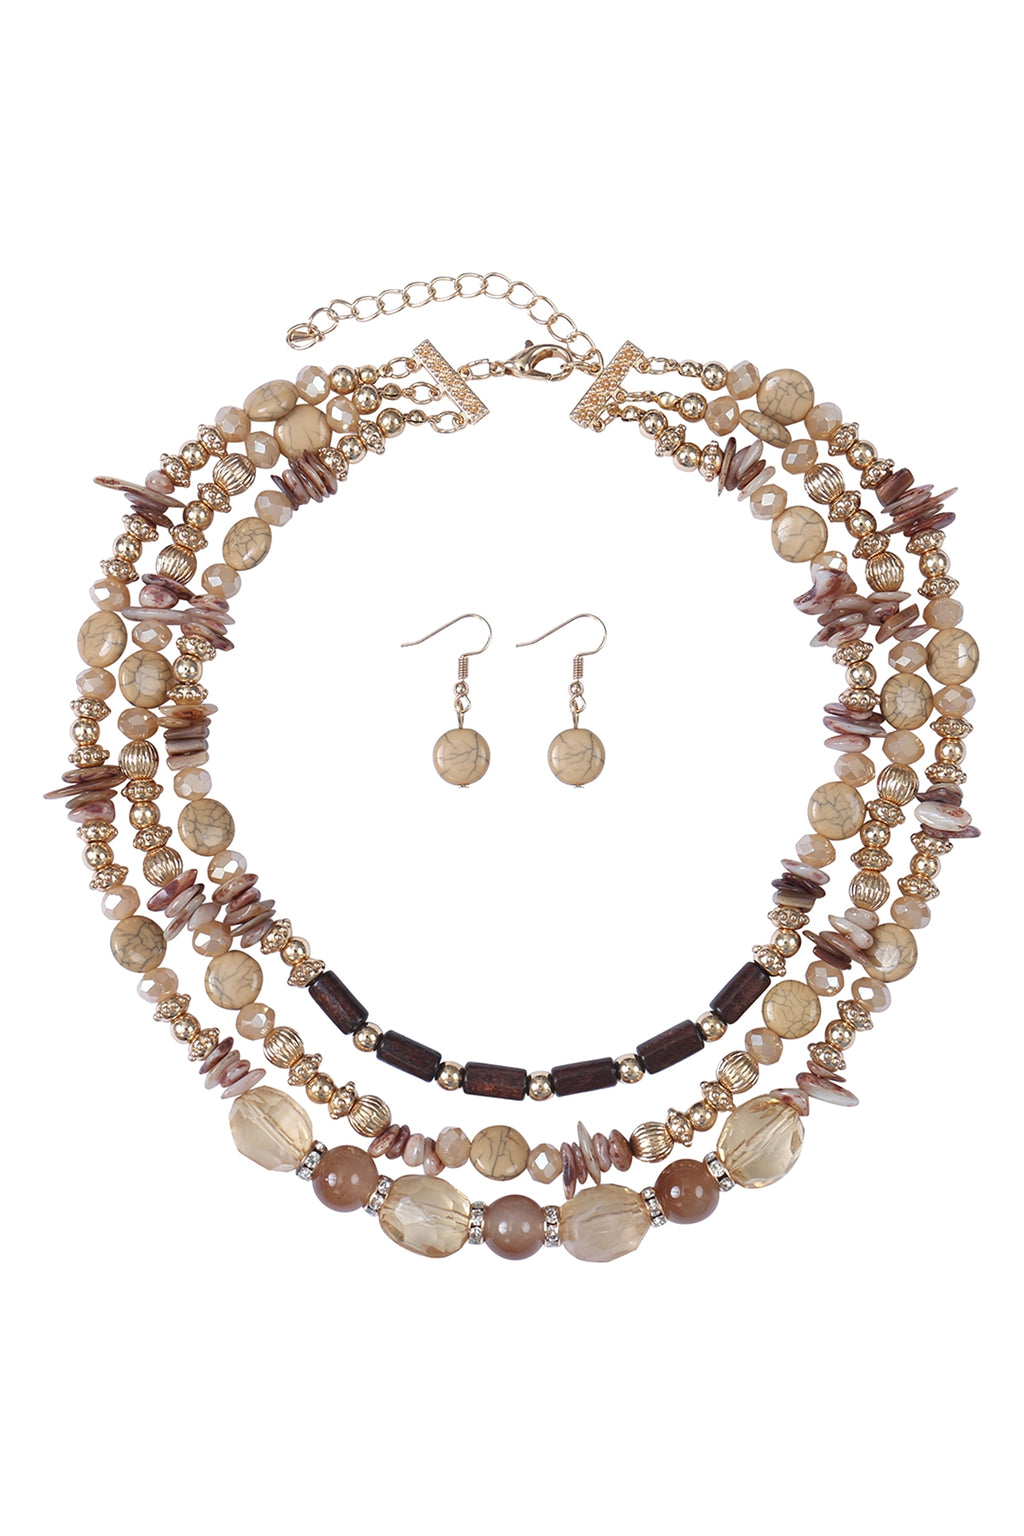 3 Line Layered Natural Stone, Mix Beads Necklace and Earring Set Light Brown - Pack of 6